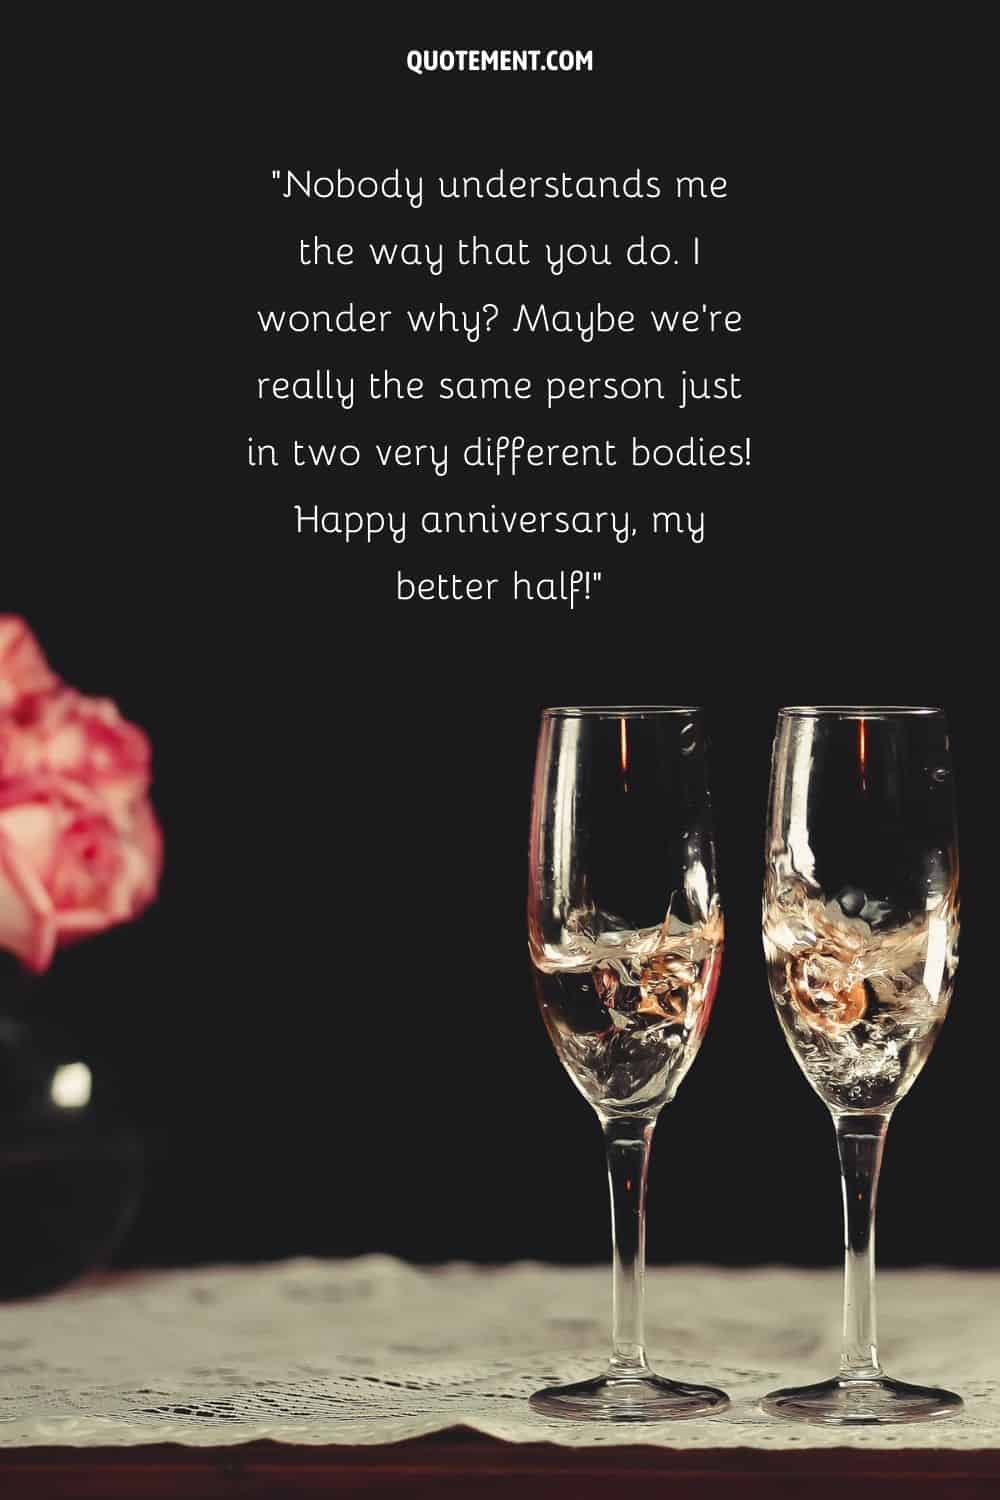 two champagne glasses with wedding rings representing the loveliest happy anniversary quote for wife